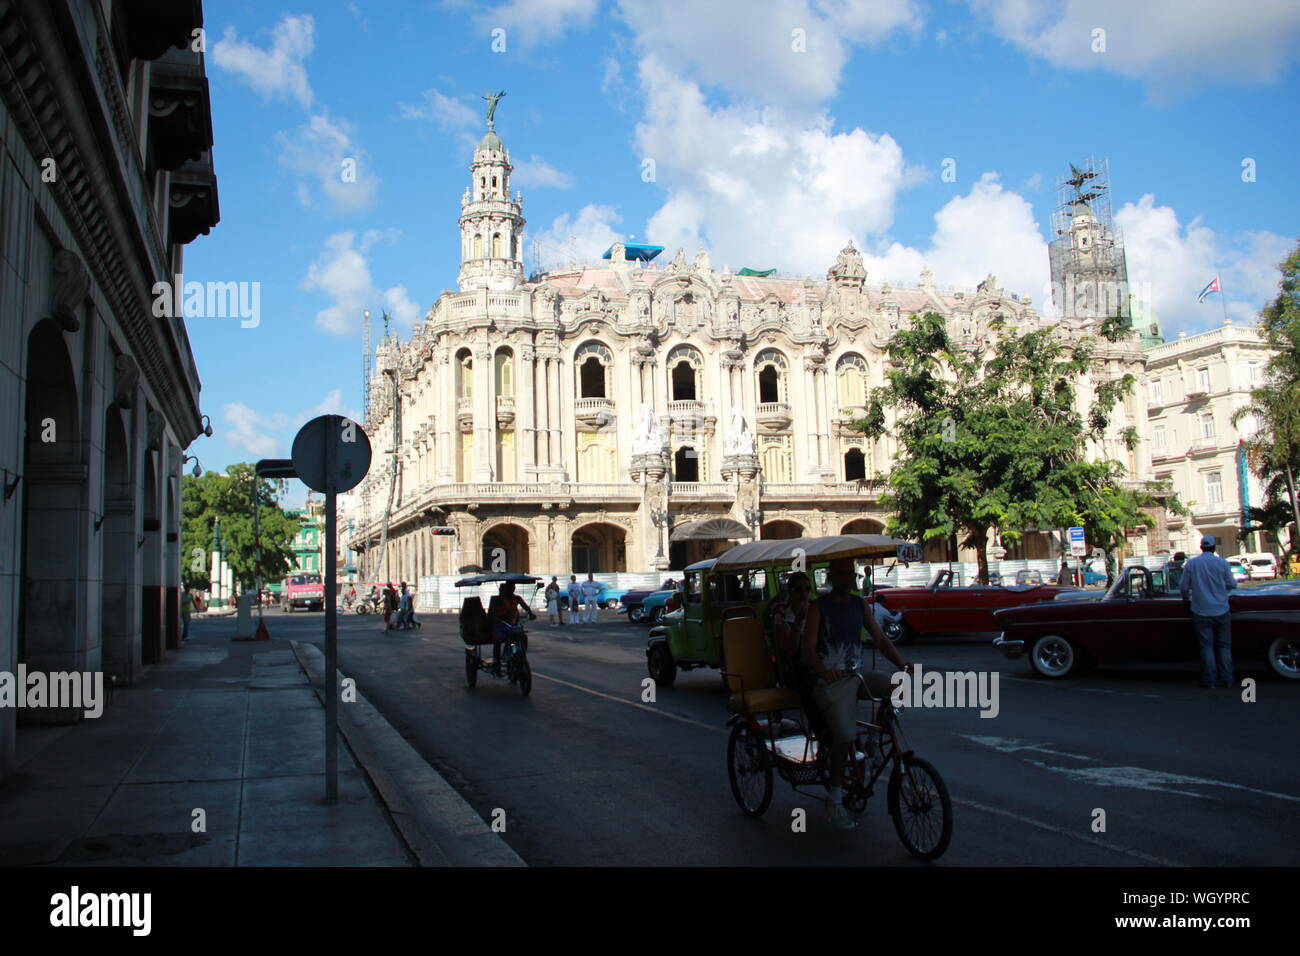 City Scene With Buildings And Bicycles Stock Photo